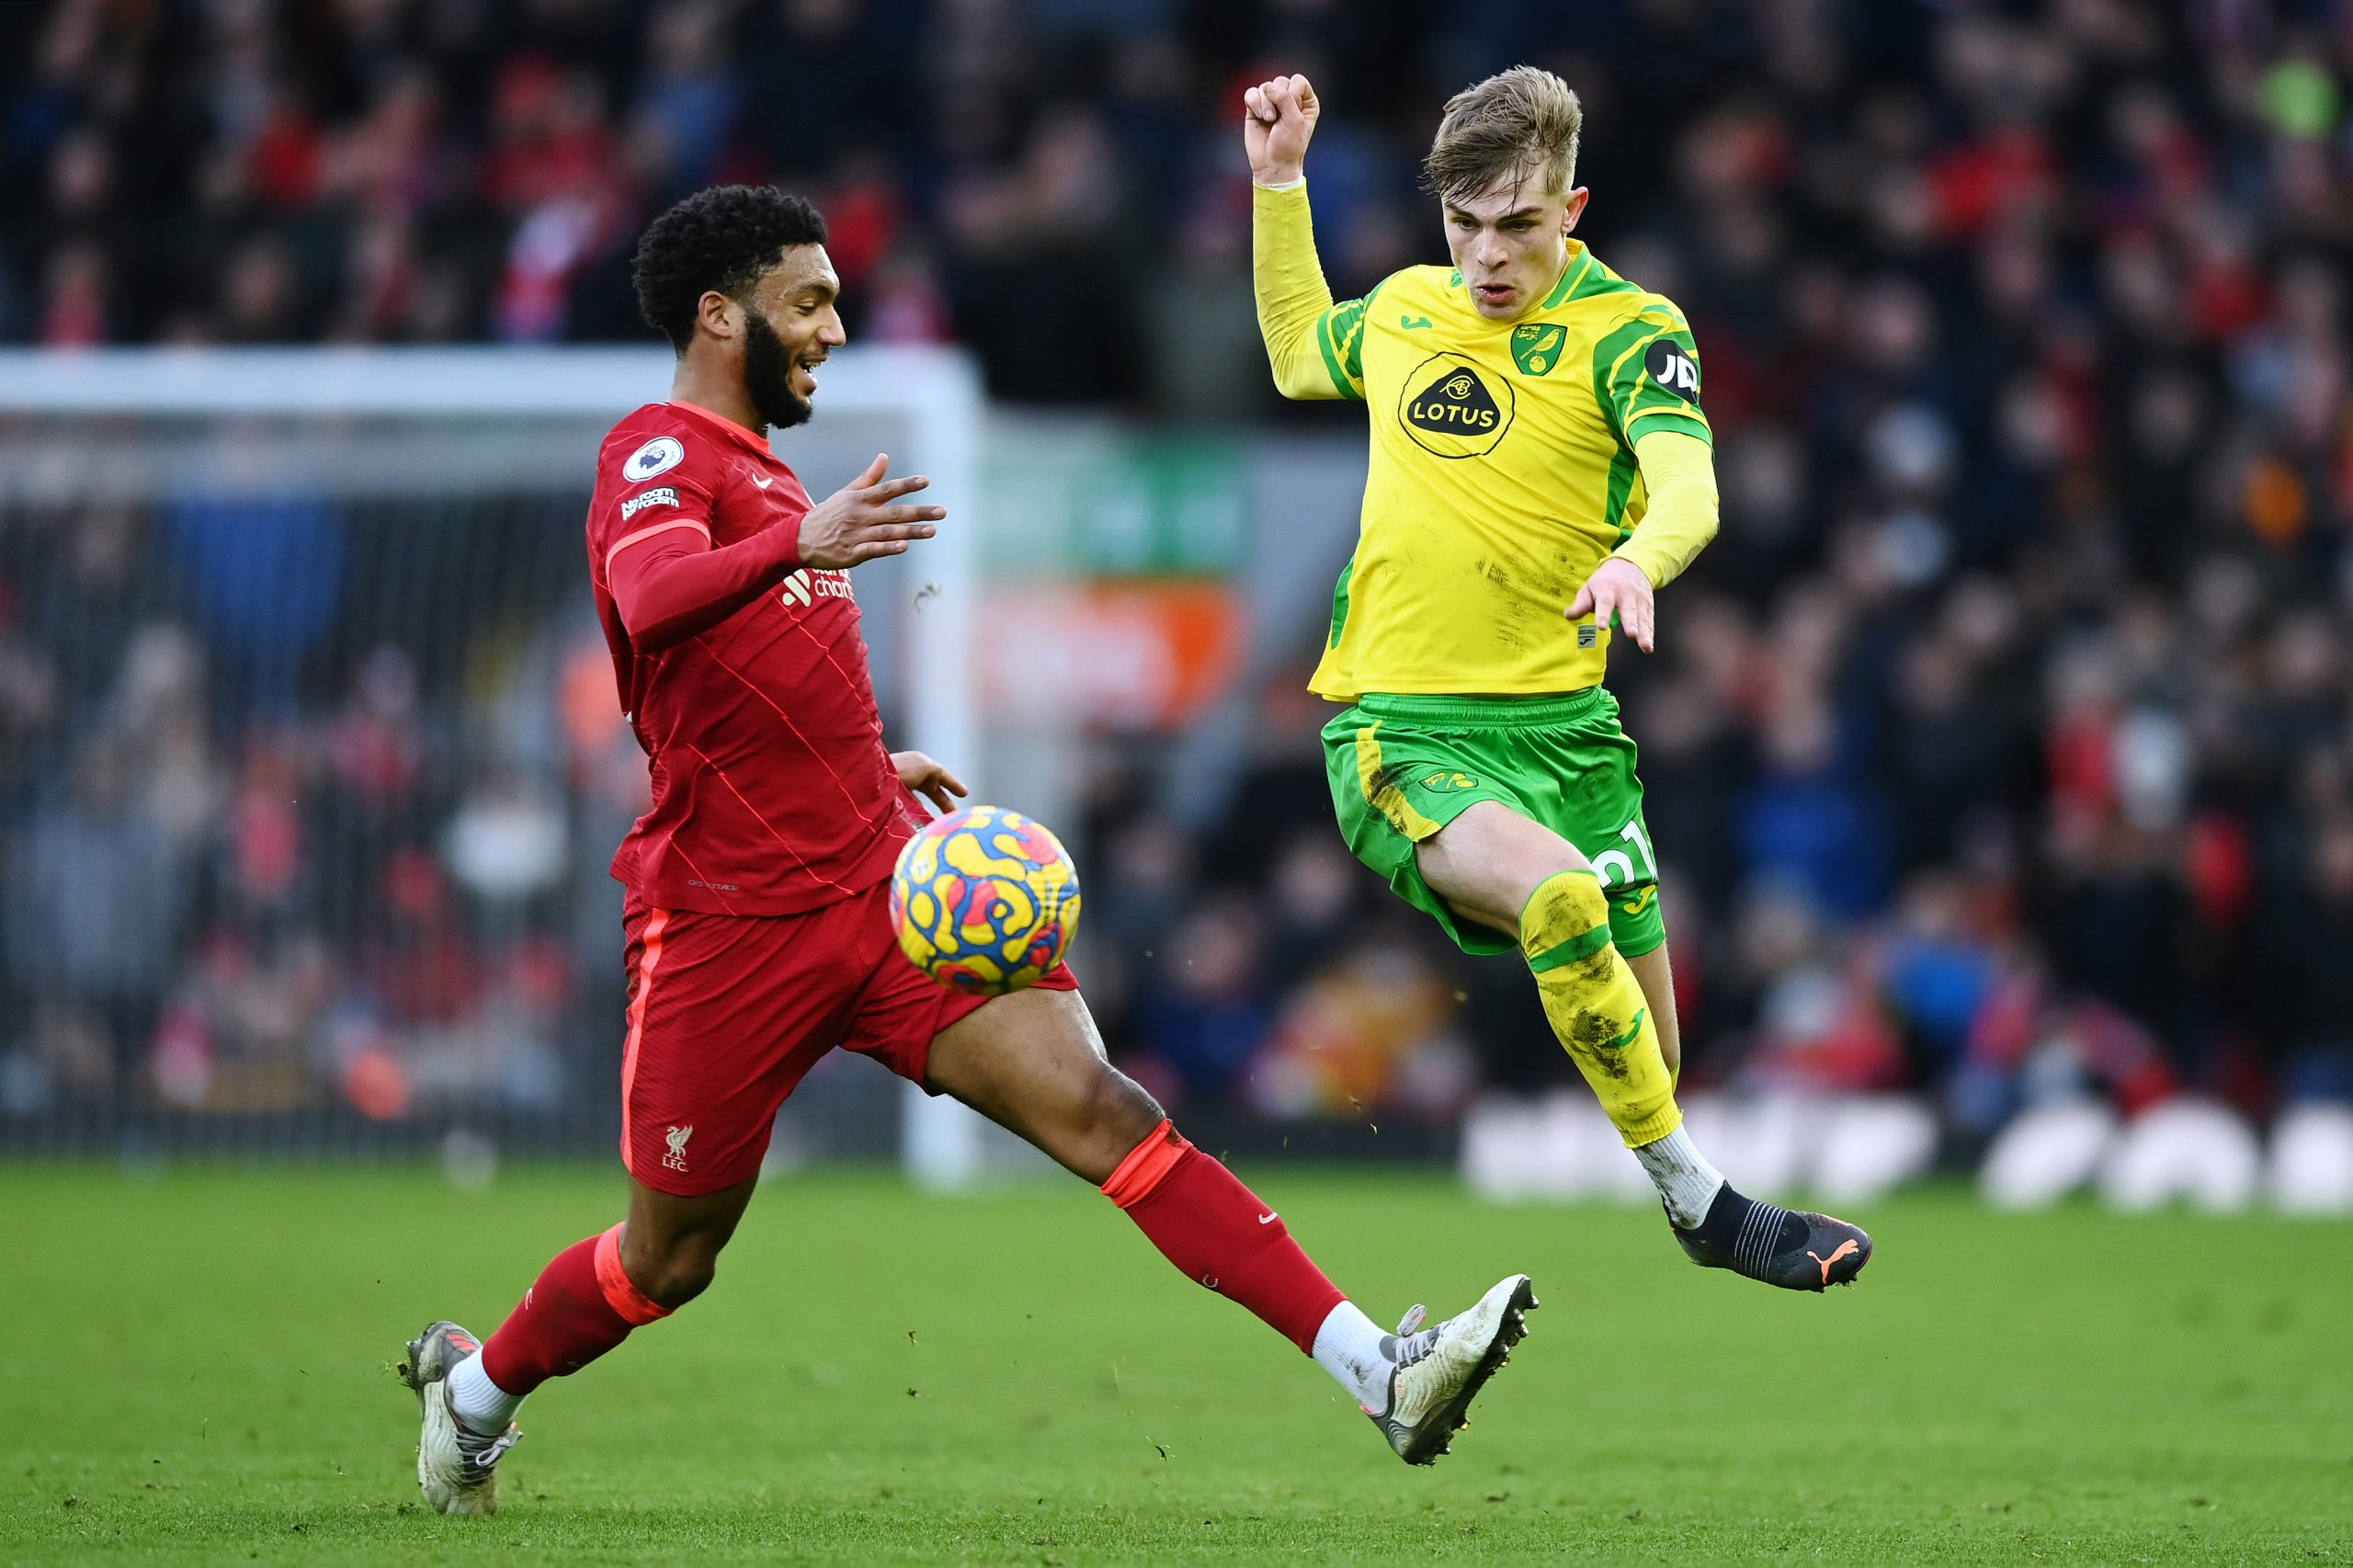 LIVERPOOL, ENGLAND - FEBRUARY 19: Brandon Williams of Norwich City is challenged by Joe Gomez of Liverpool during the Premier League match between Liverpool and Norwich City at Anfield on February 19, 2022 in Liverpool, England. (Photo by Gareth Copley/Getty Images)
The 4th Official uses images provided by the following image agency:
Getty Images (https://www.gettyimages.de/)
Imago Images (https://www.imago-images.de/)